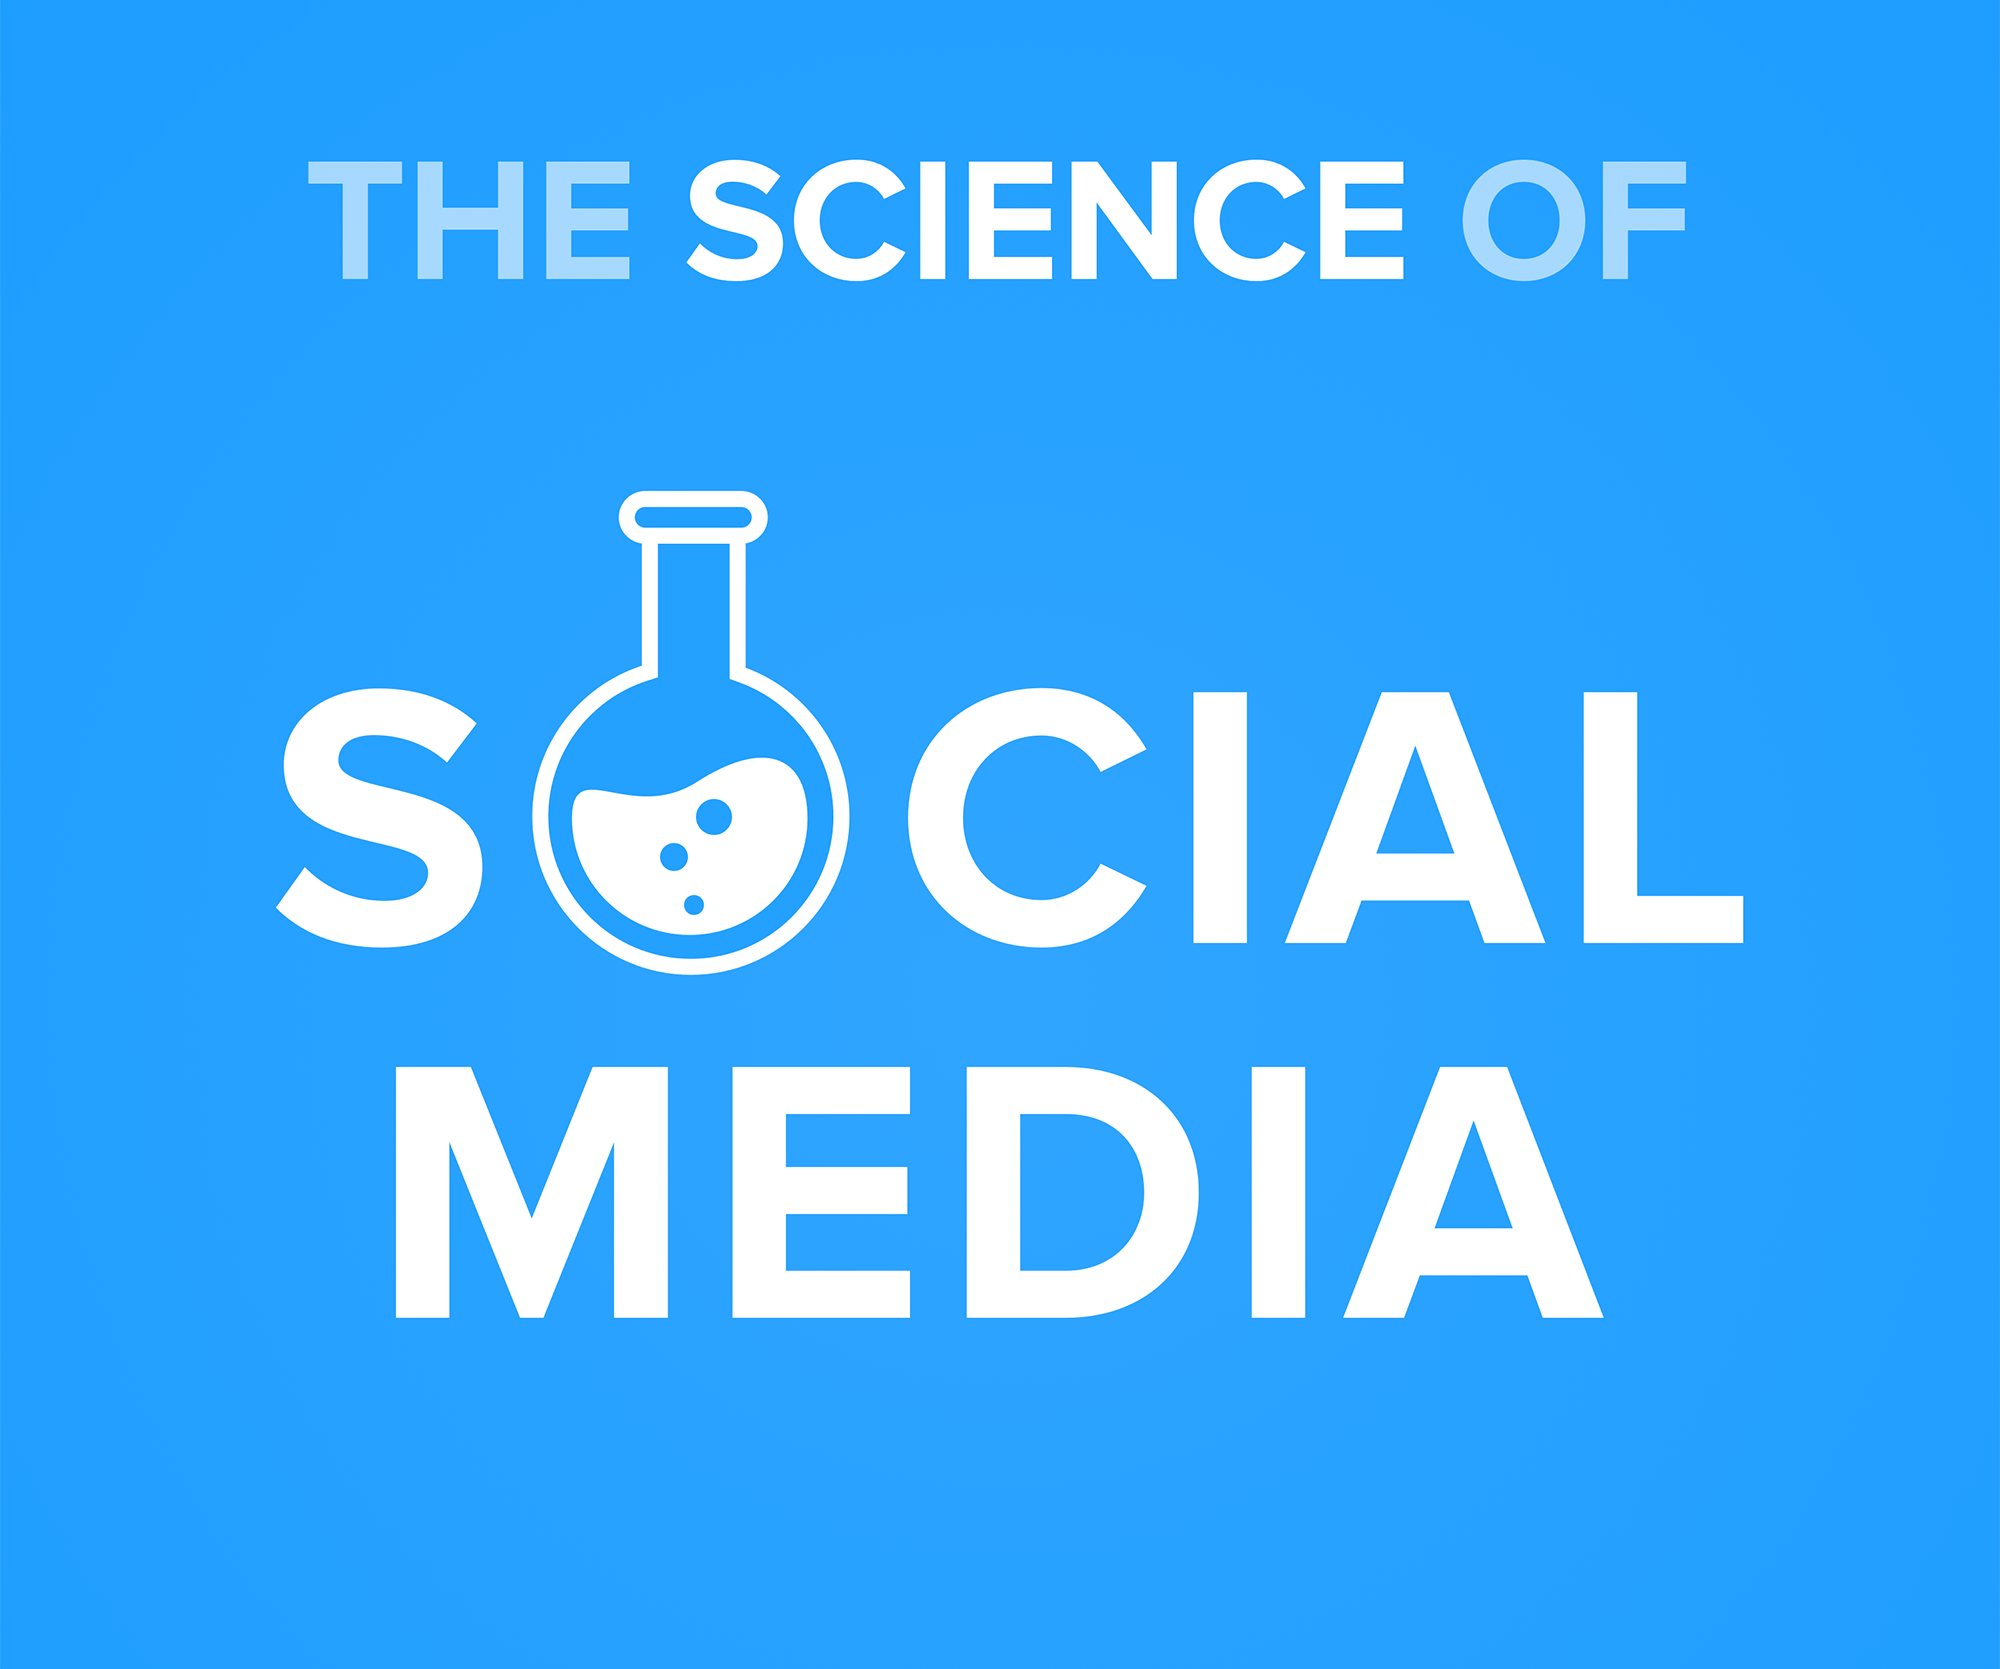 Top Social Media Logo - The Science of Social Media - Listen to Buffer podcast episodes, see ...